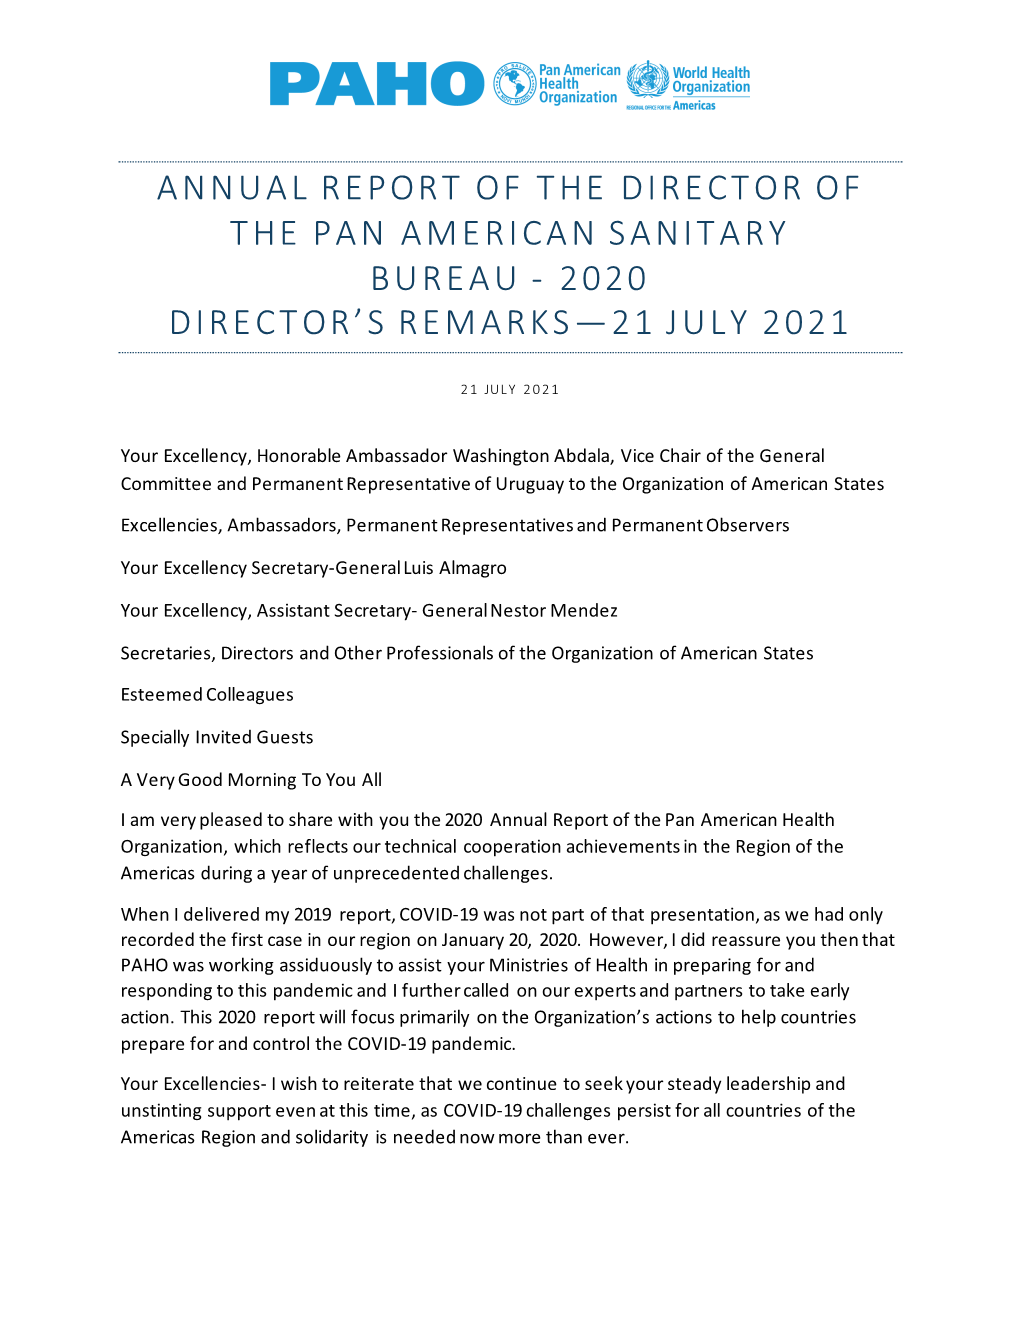 Director's Remarks to the OAS -2020